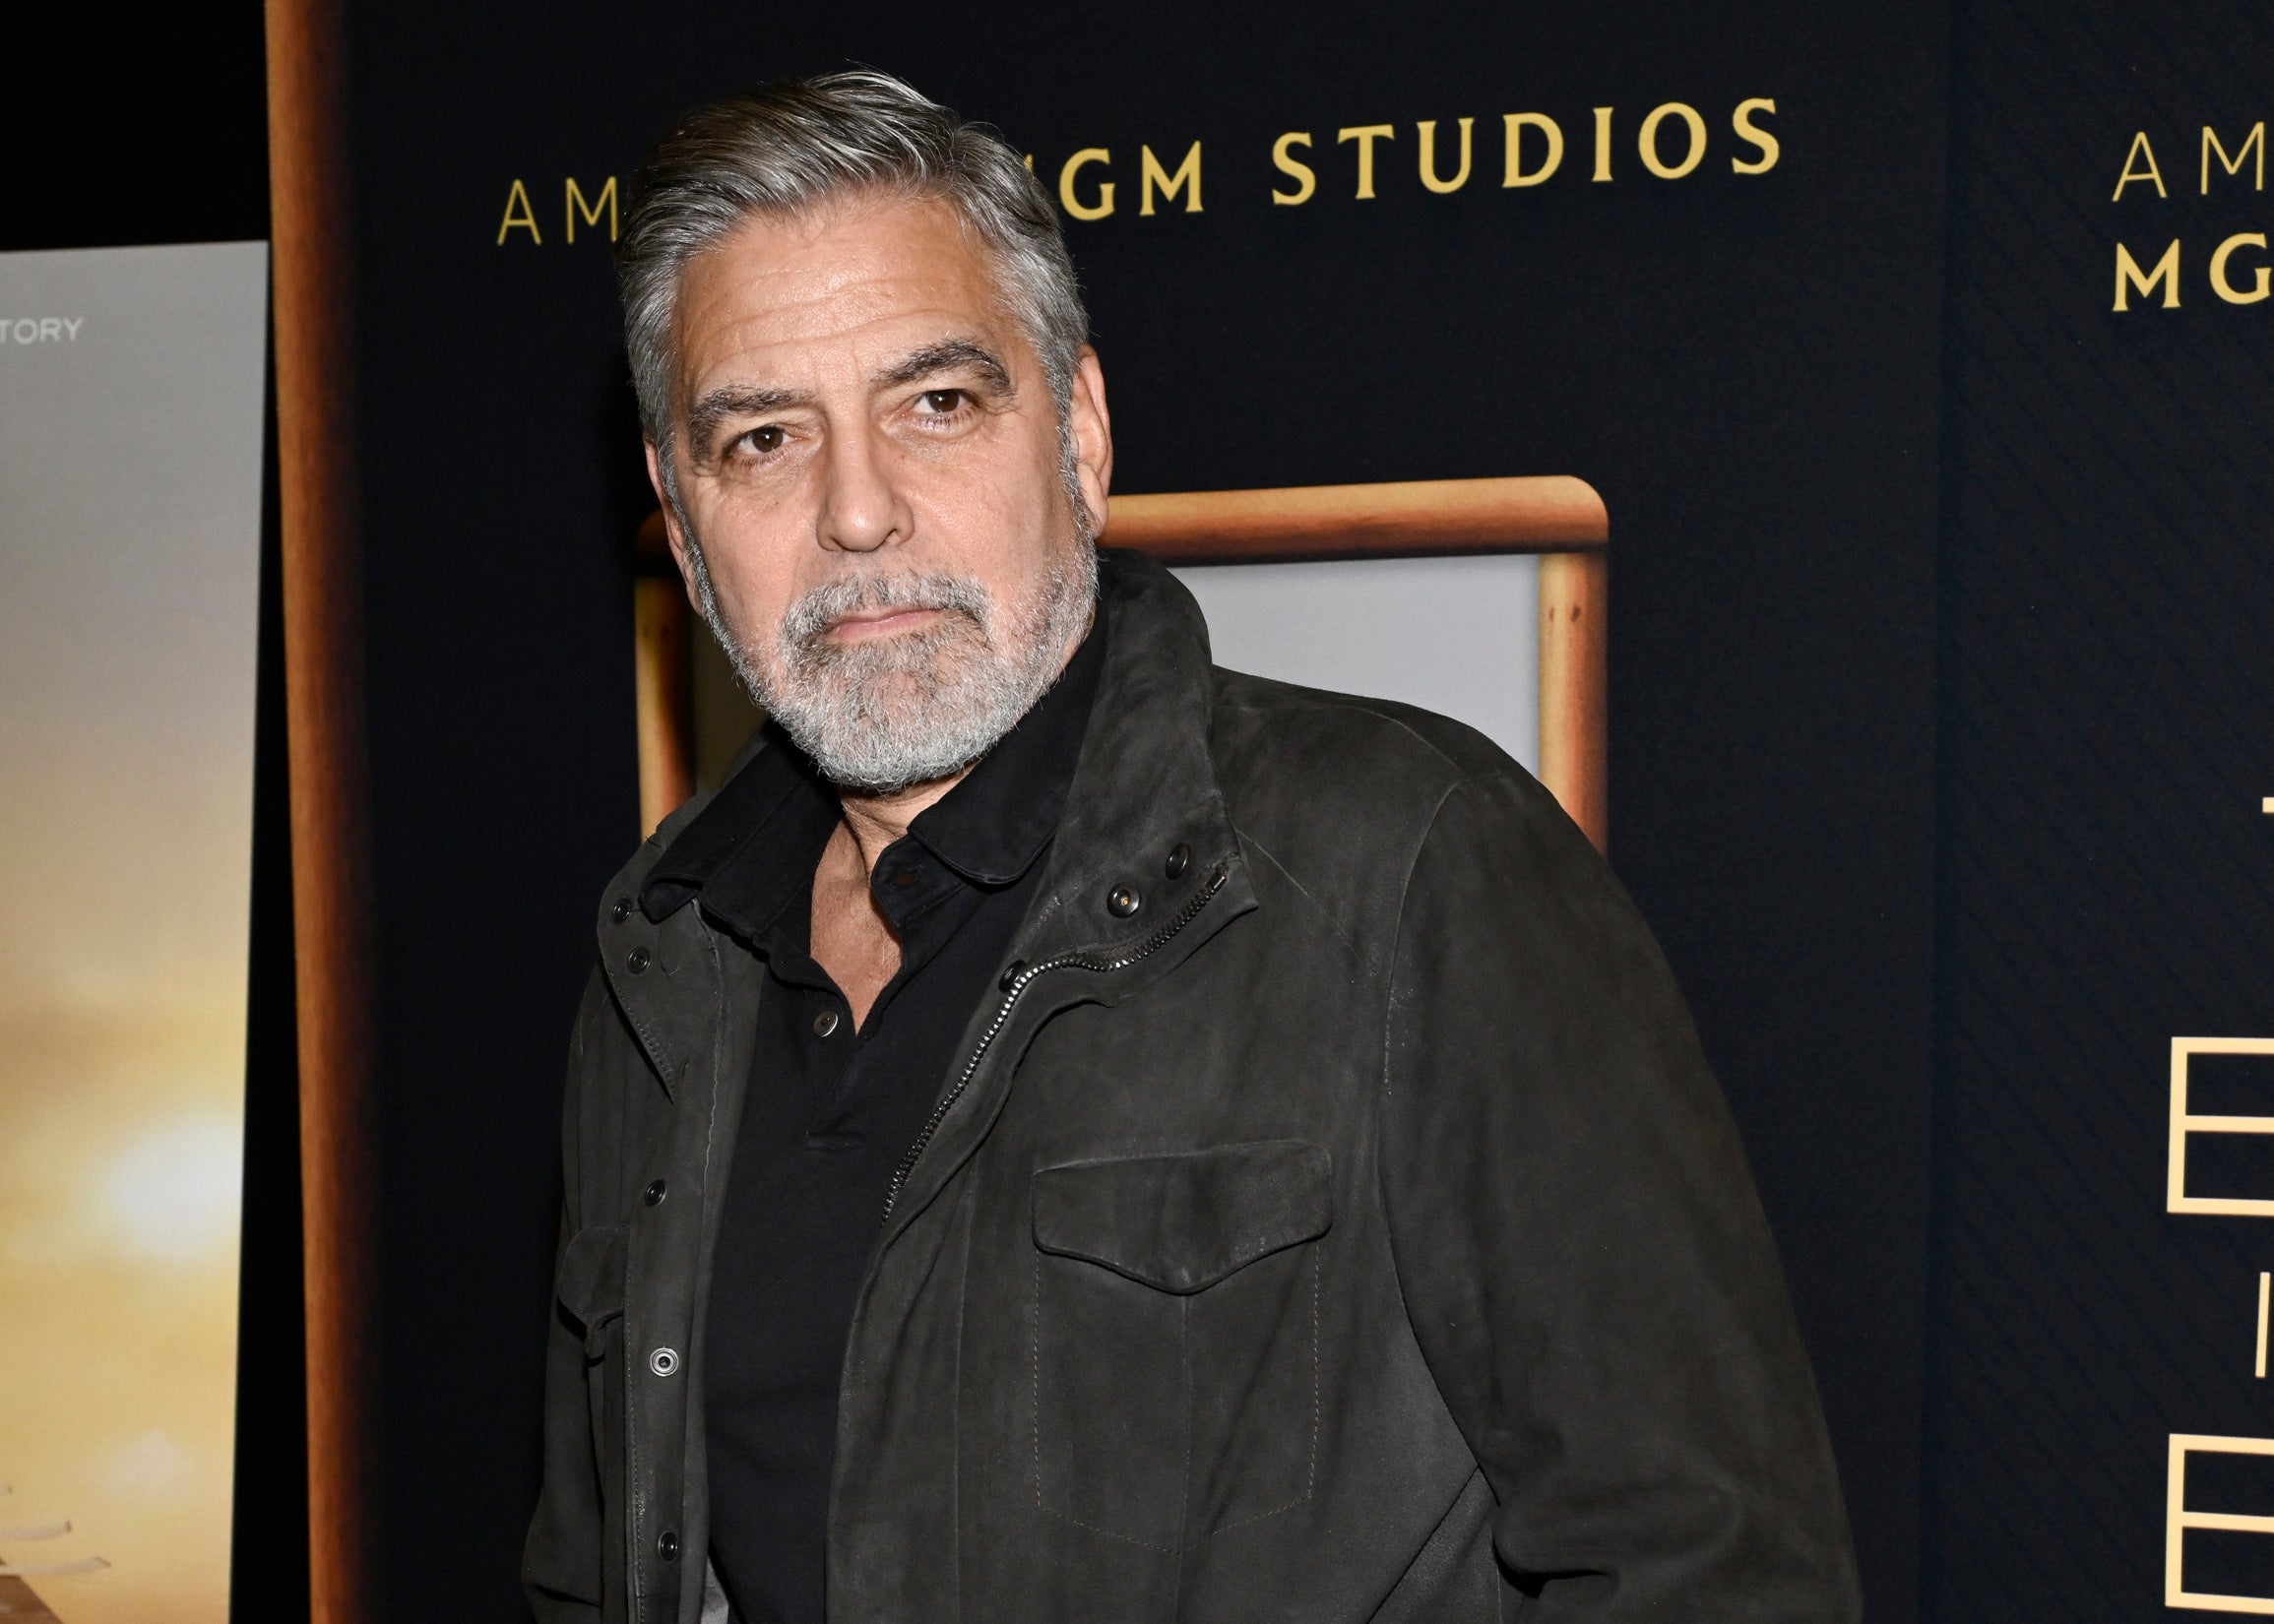 George Clooney called on Joe Biden to drop out of the race in an op-ed in The New York Times